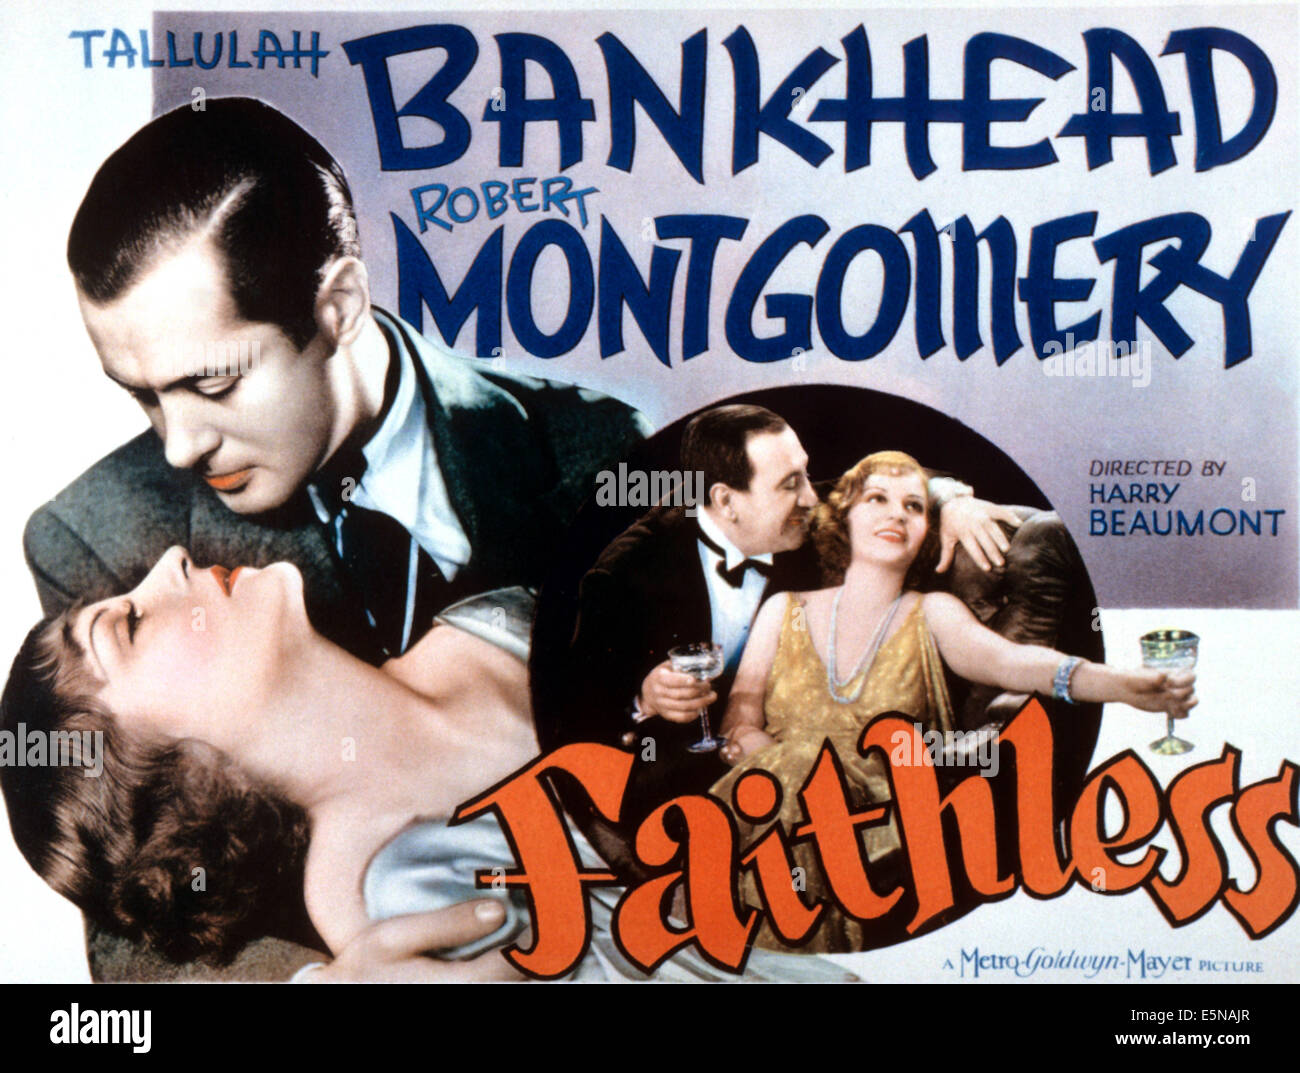 Download this stock image: FAITHLESS, Tallulah Bankhead, Robert Montgomery,...